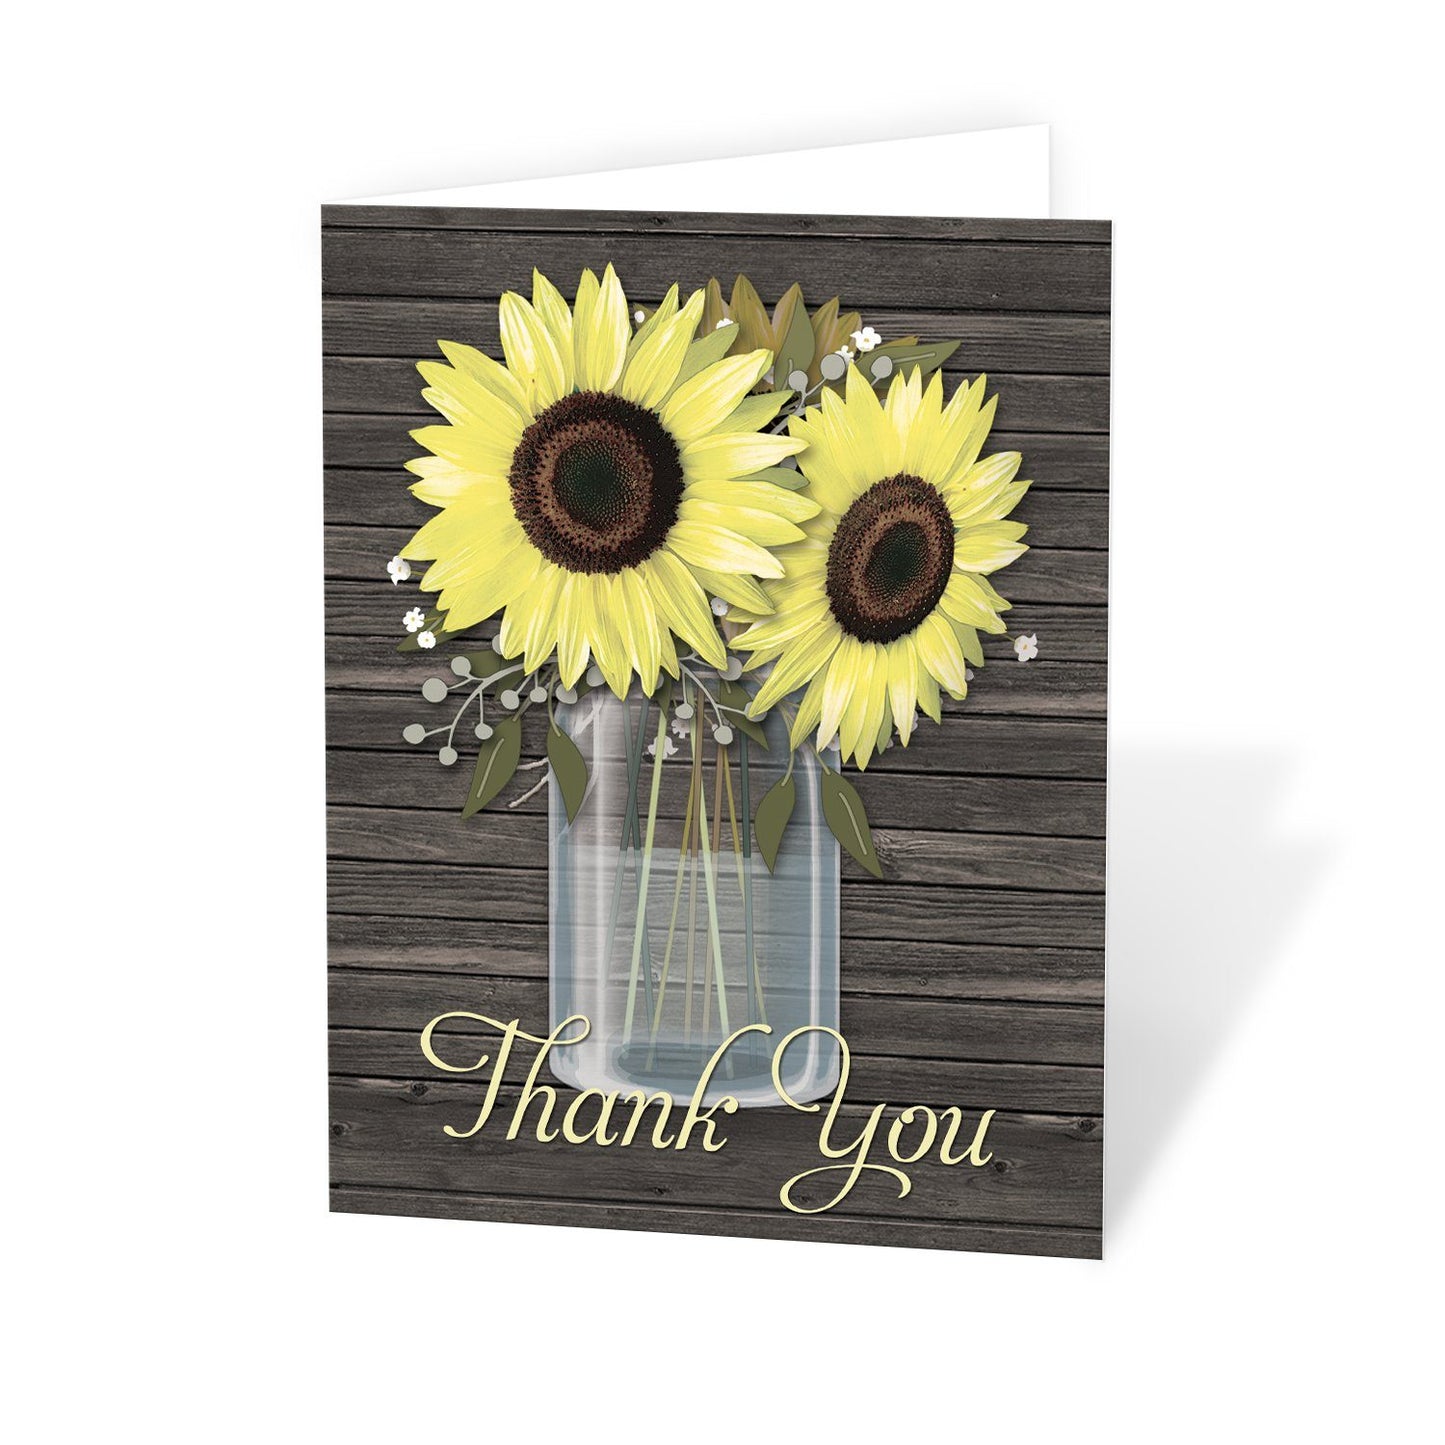 Rustic Sunflower Wood Mason Jar - Sunflower Thank You Cards at Artistically Invited